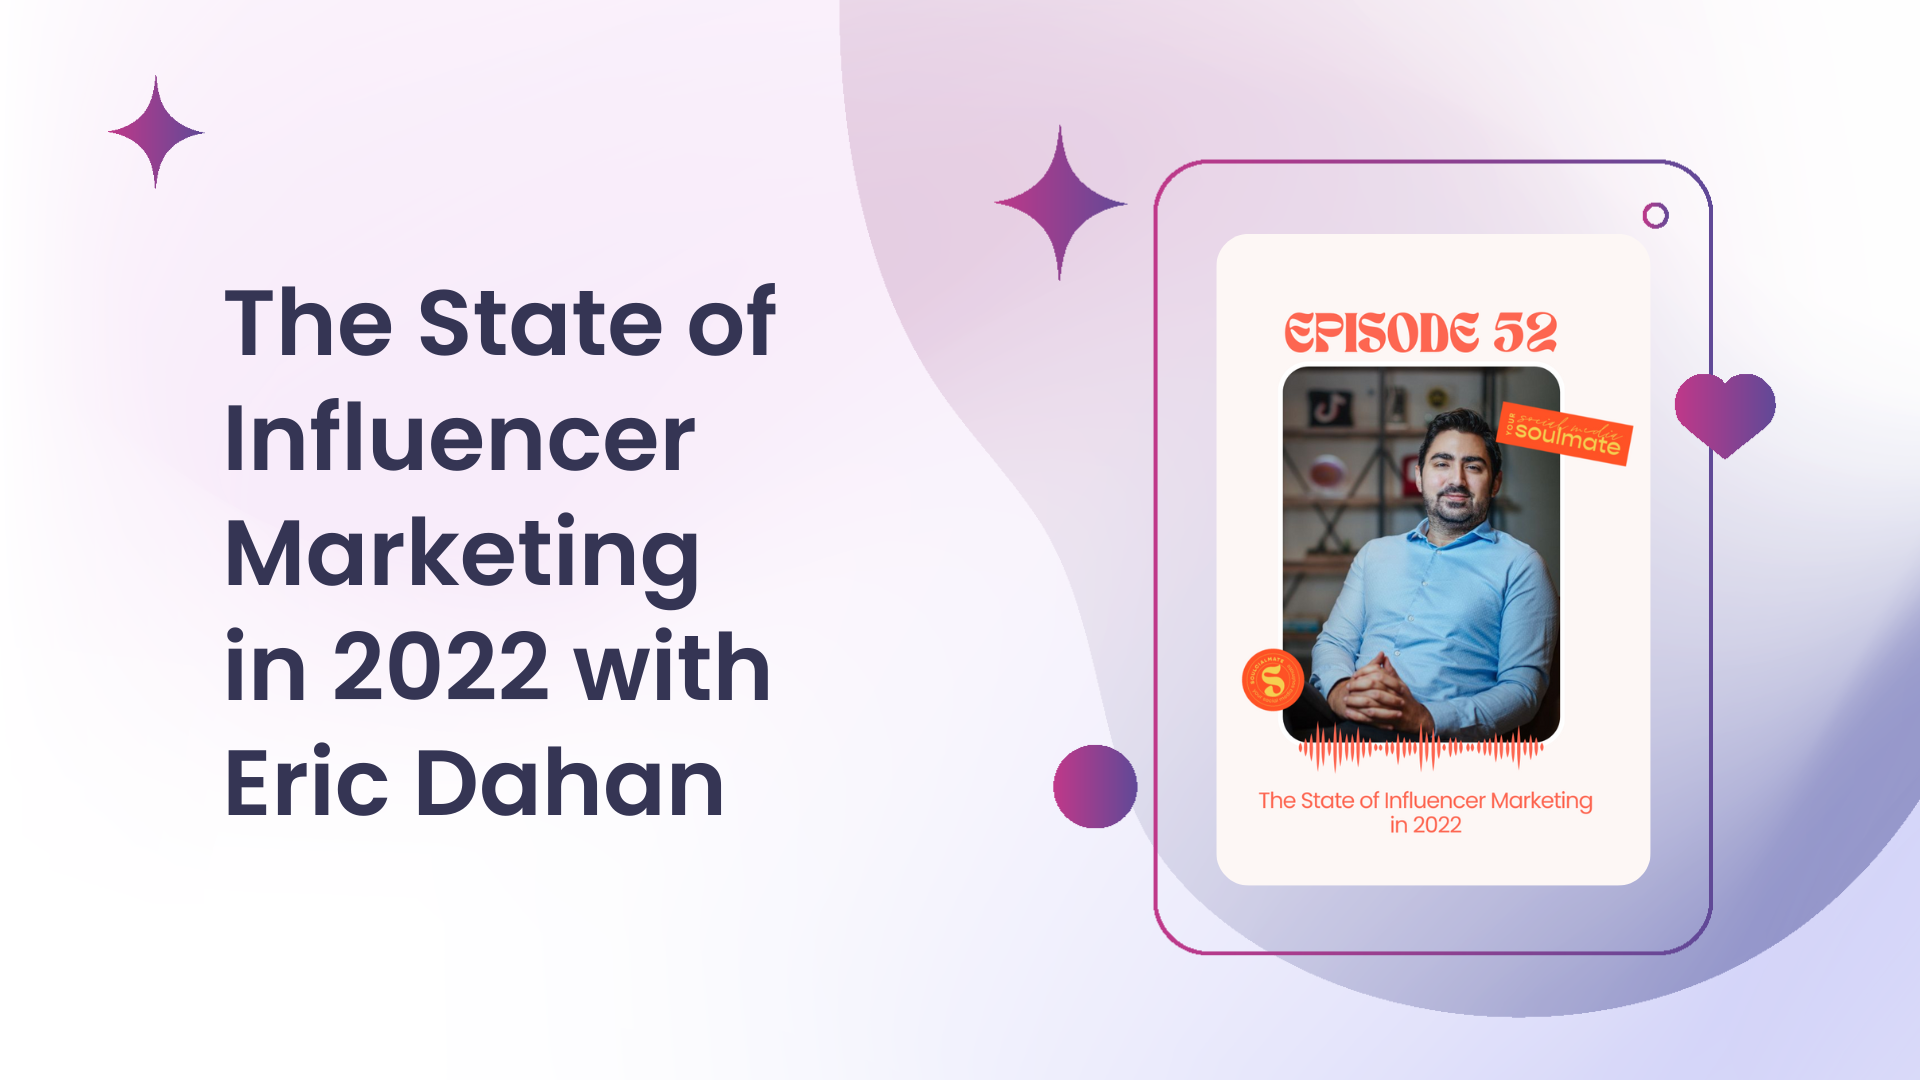 The State of Influencer Marketing in 2022 with Eric Dahan